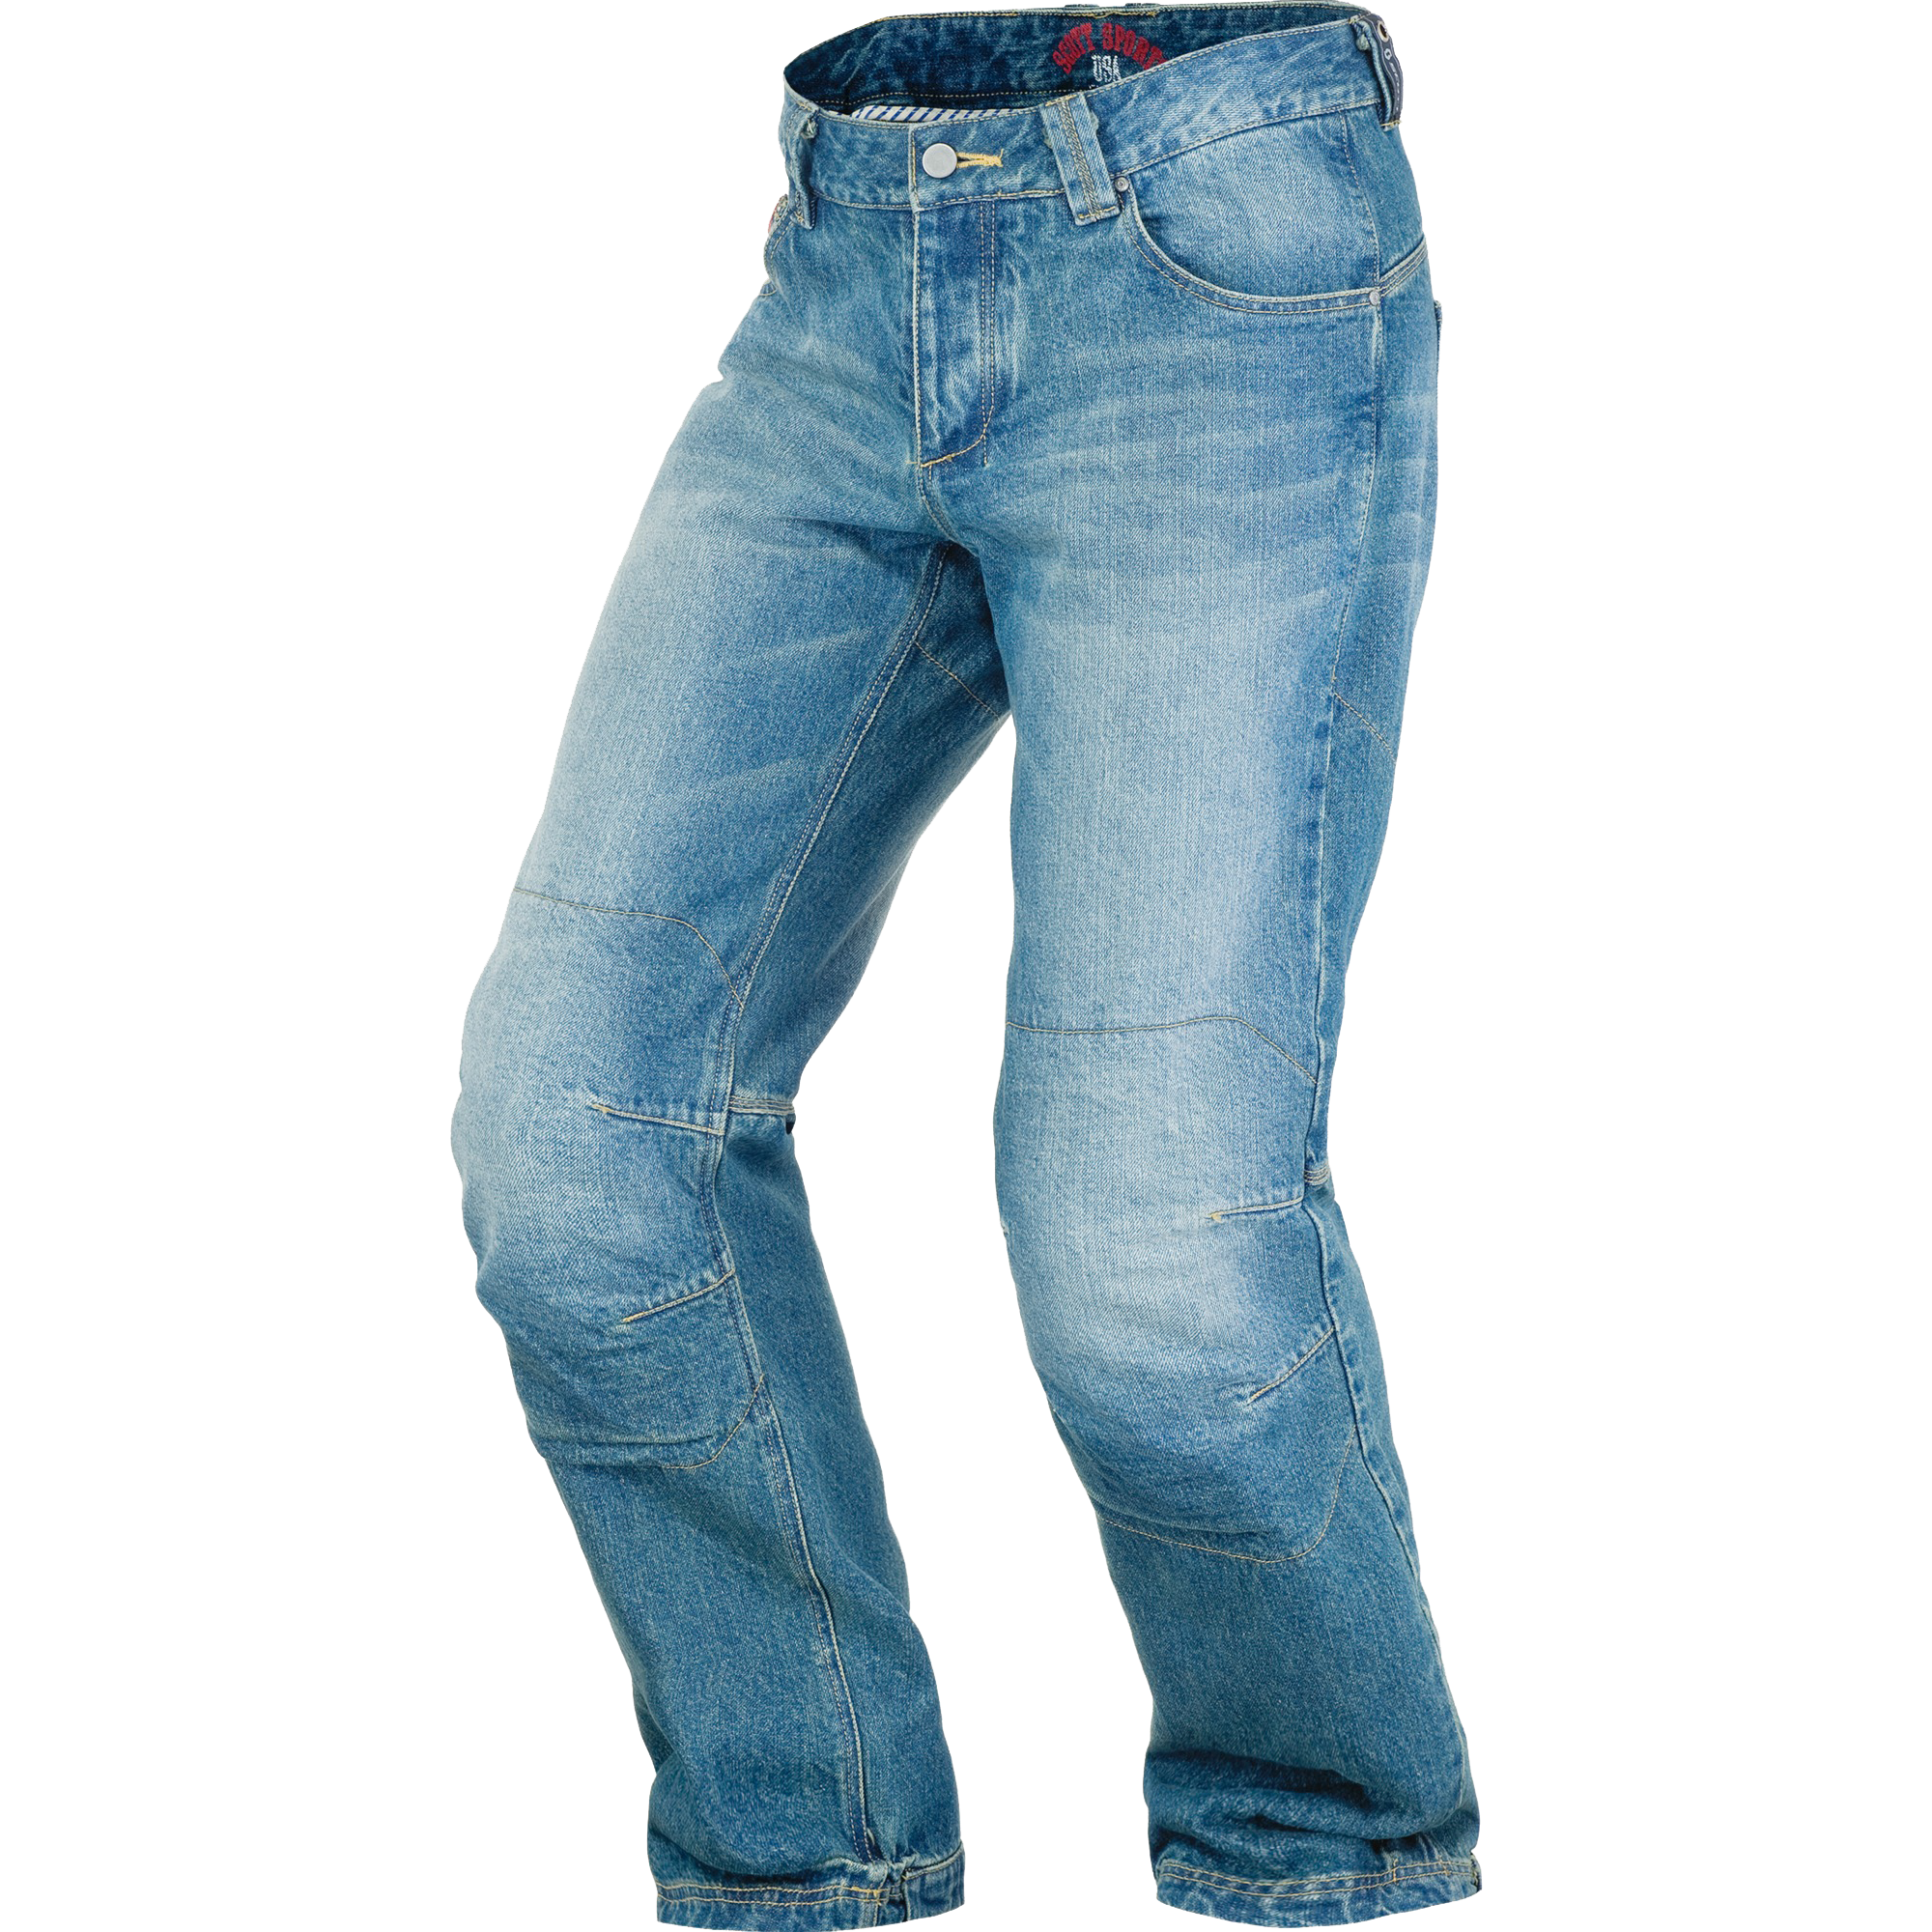 Jeans PNG 